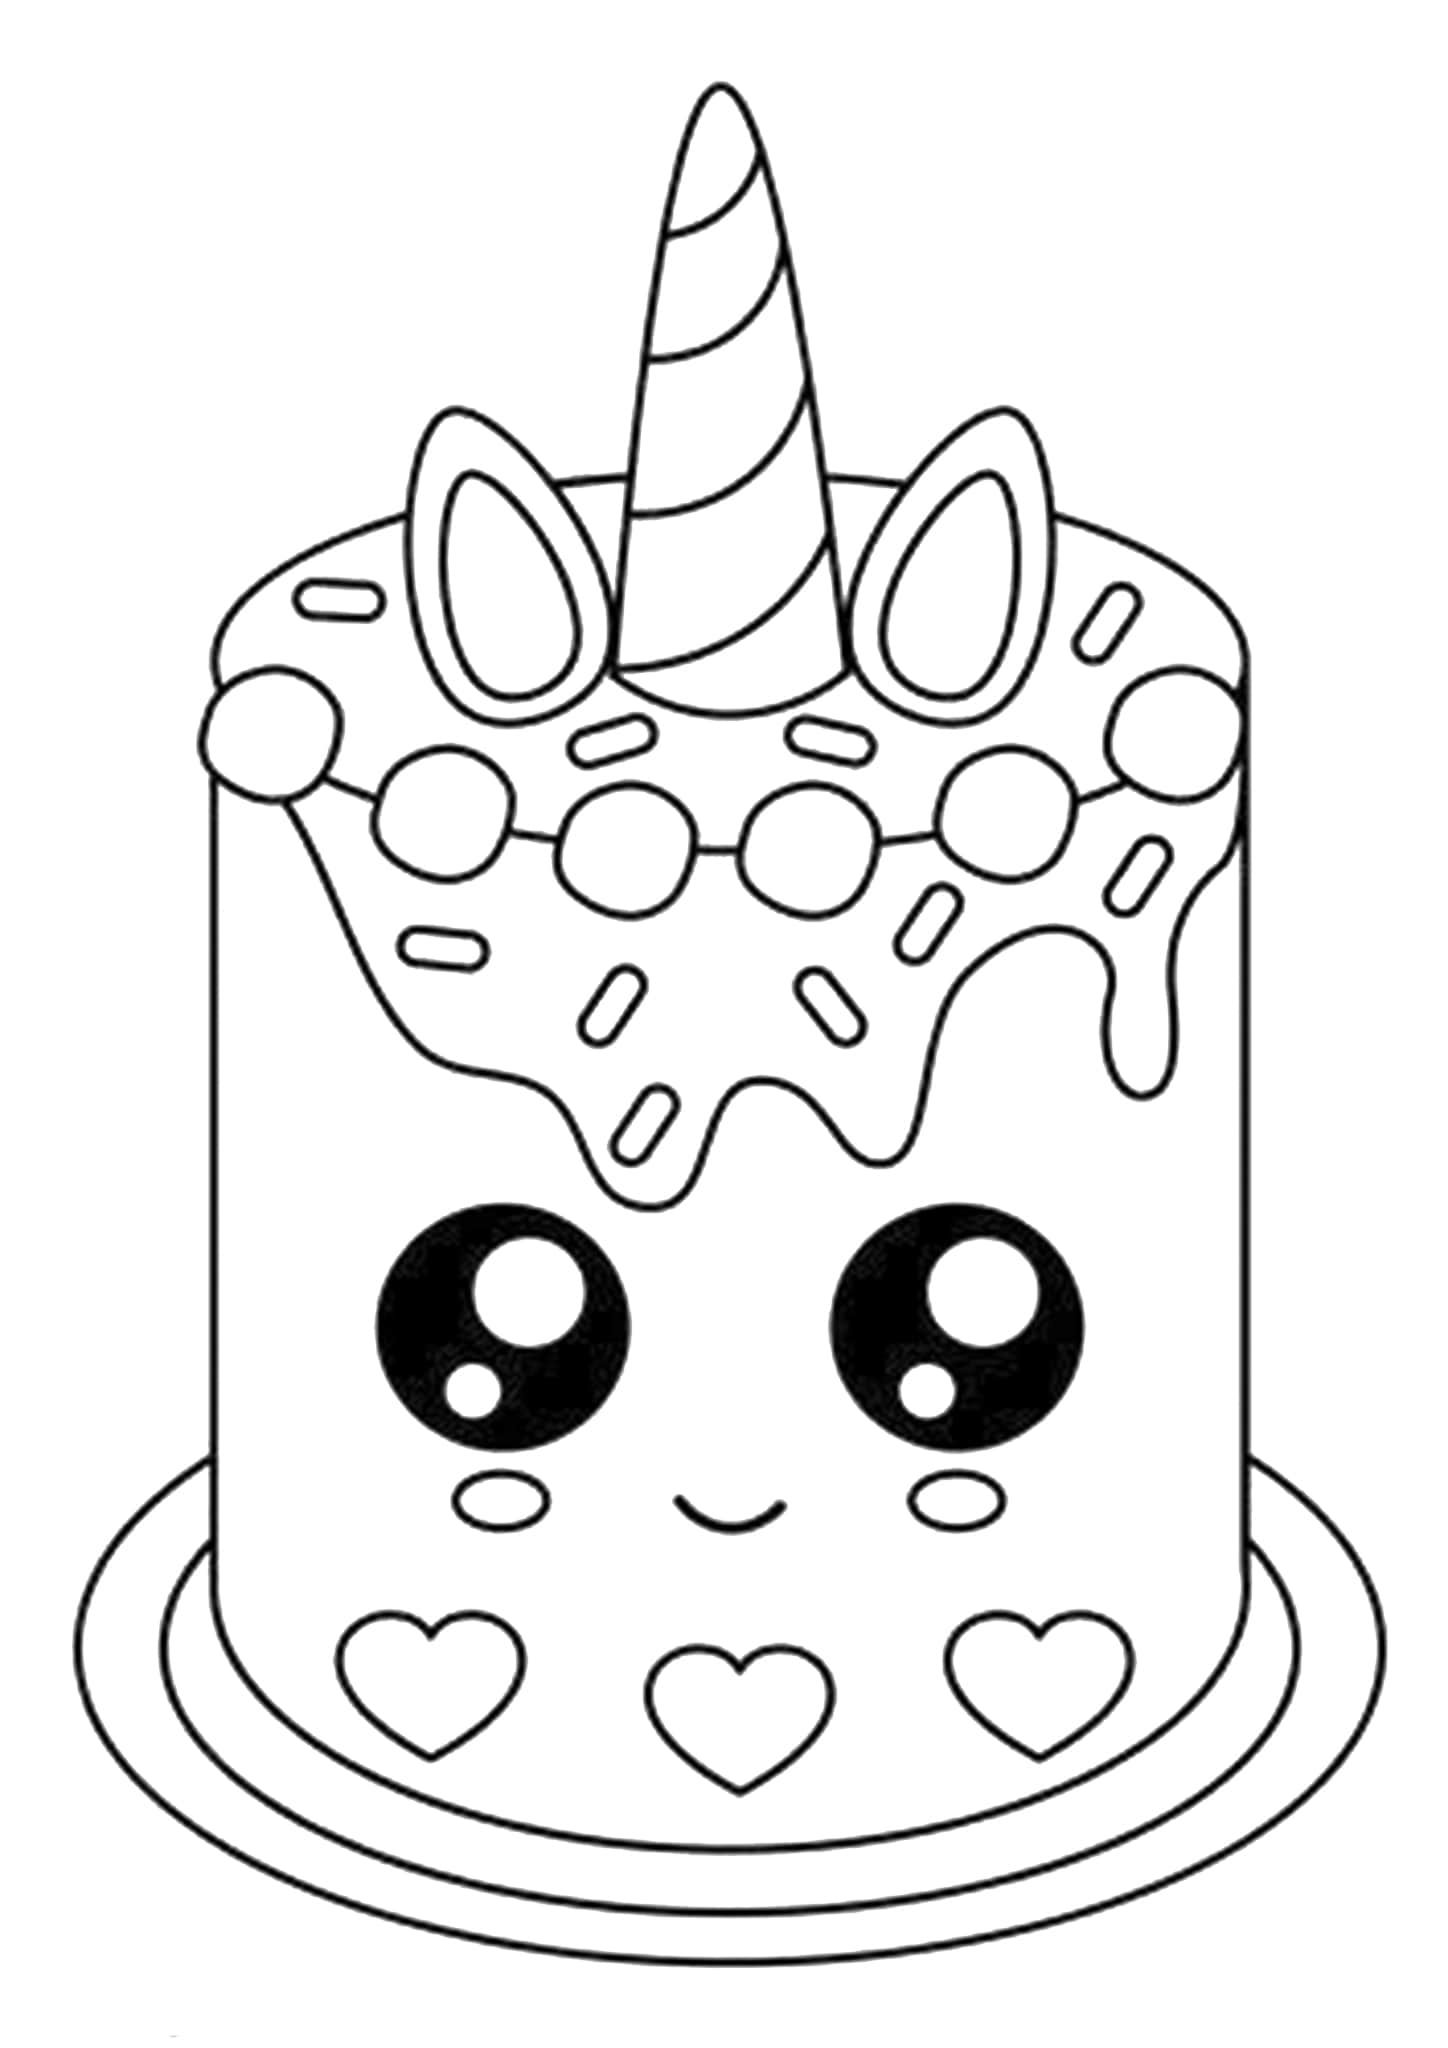 Unicorn Cake Coloring Pages   Coloring Home